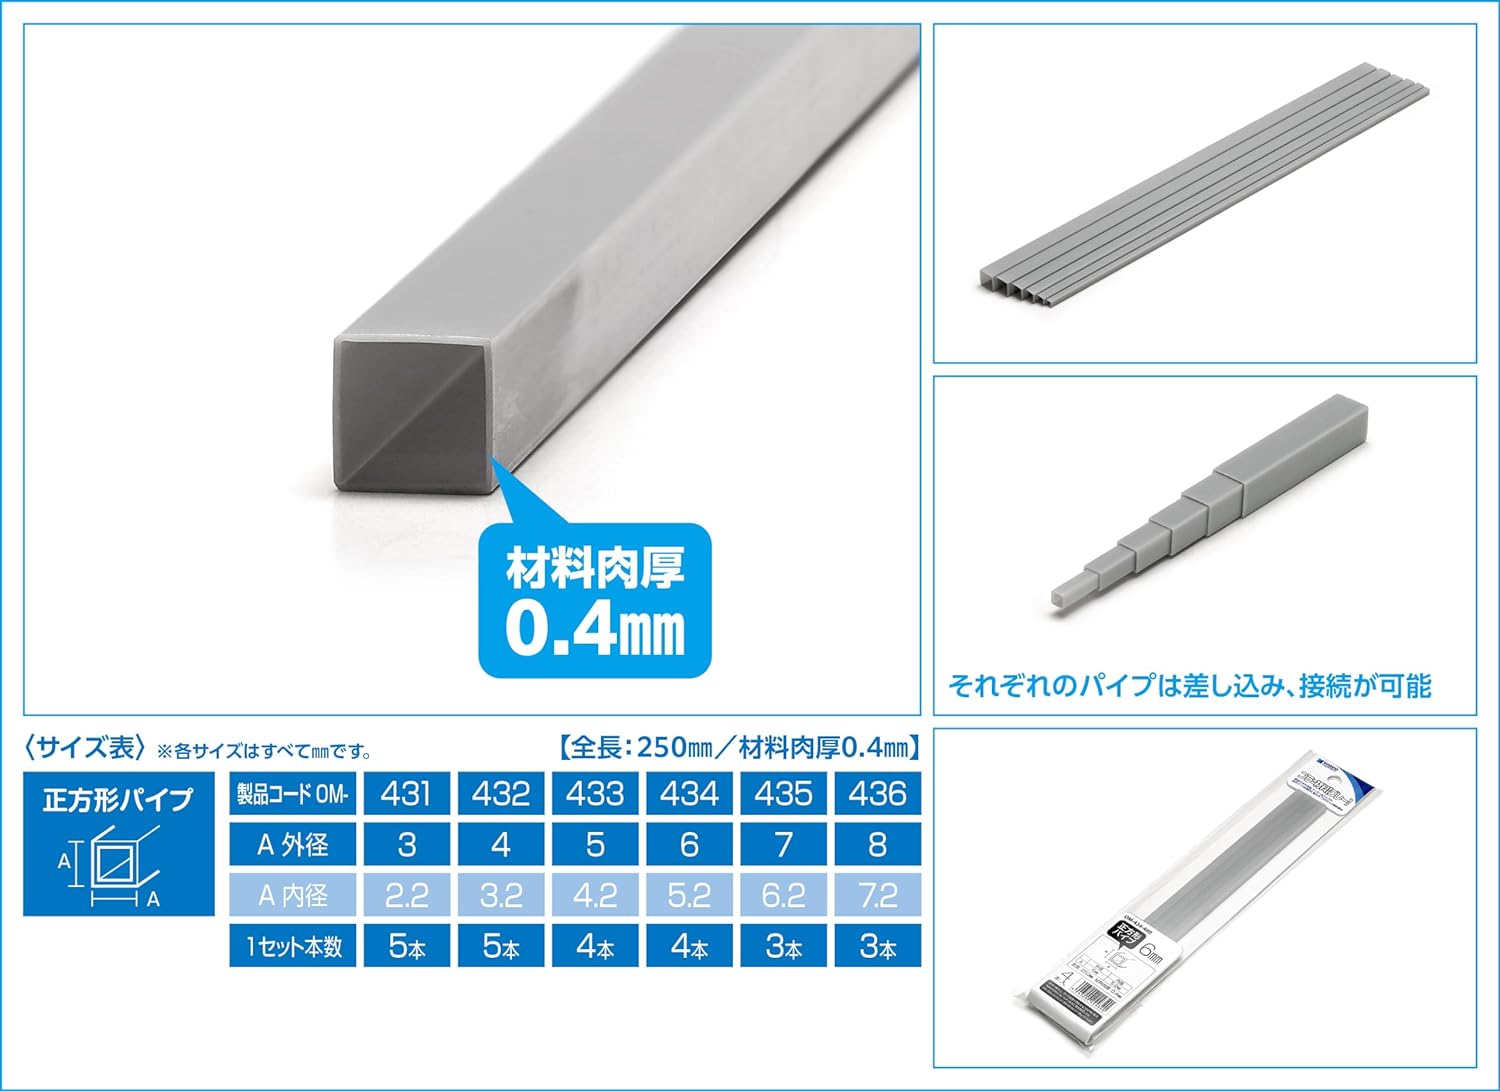 Wave OM-436 Plastic Material Gray Square Pipe 0.3 inches (8 mm), 3 Pieces, Material Series - BanzaiHobby